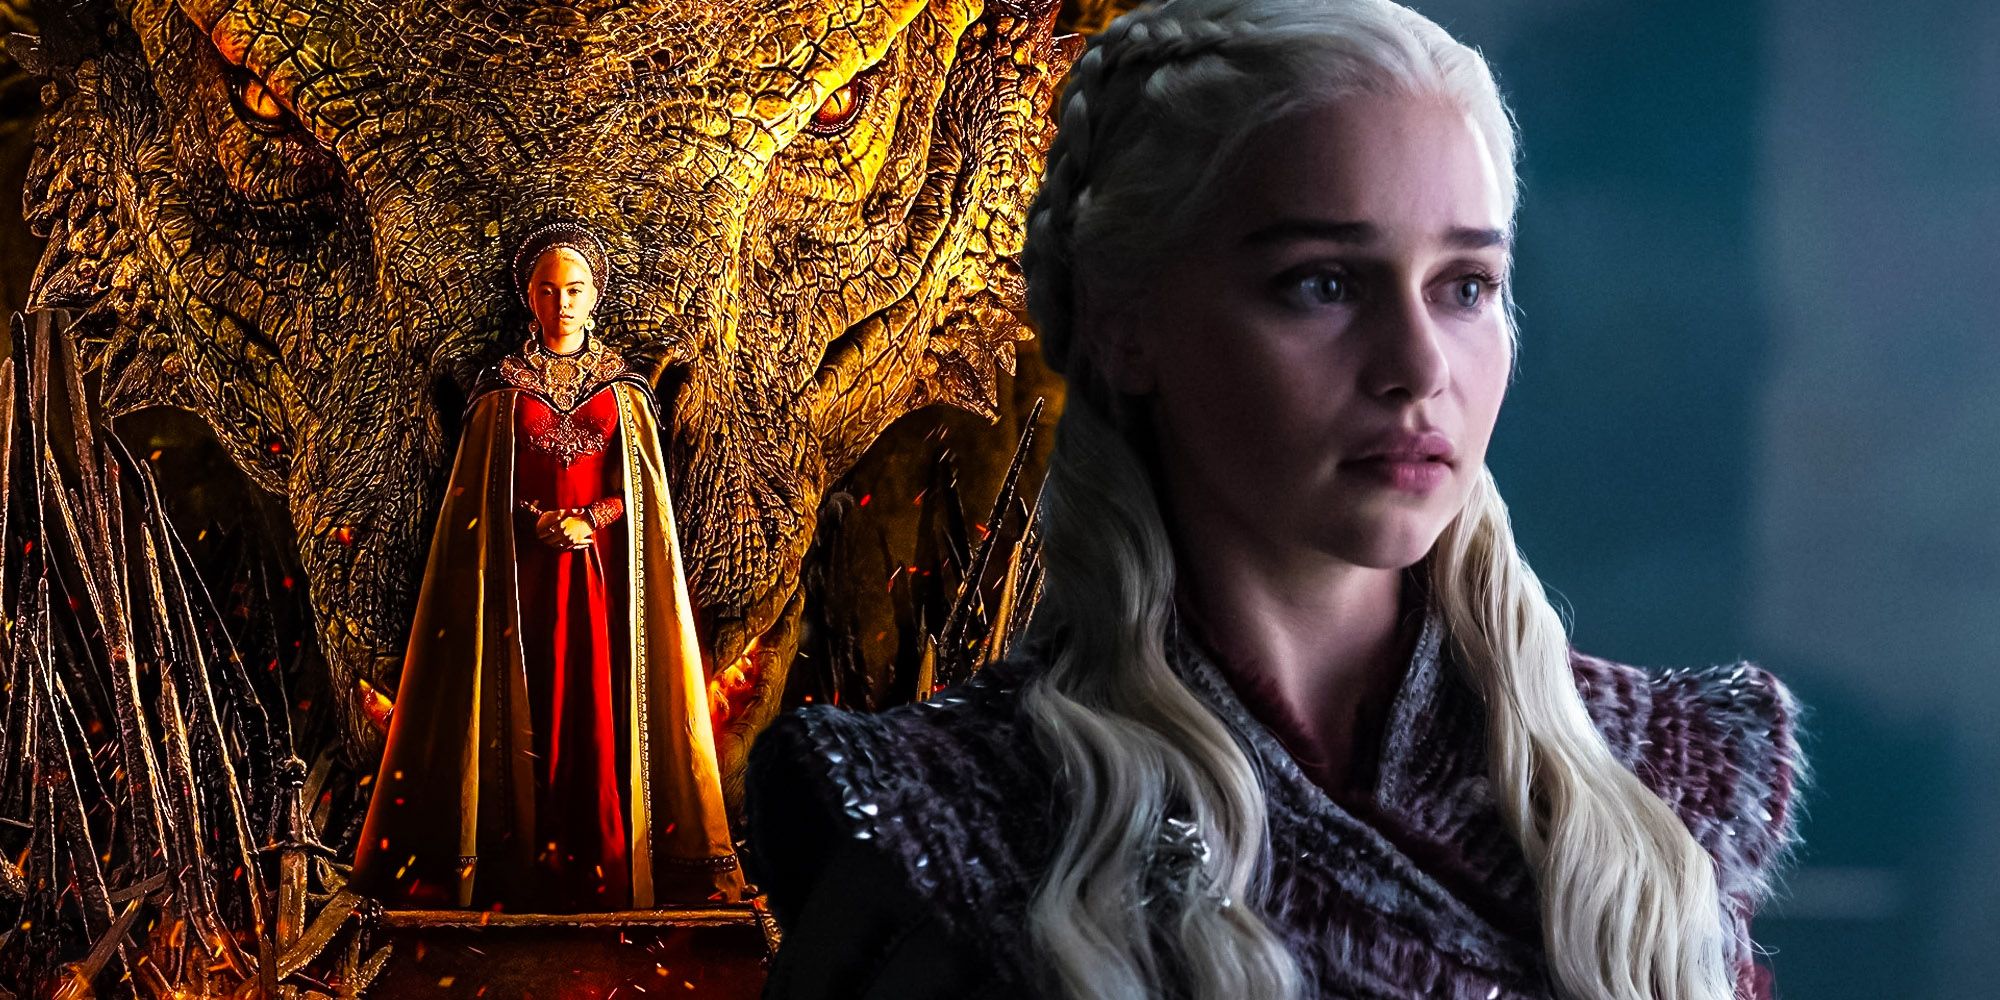 Blended image showing Rhaenyra in House of the Dragon and Daenerys in Game of Thrones.